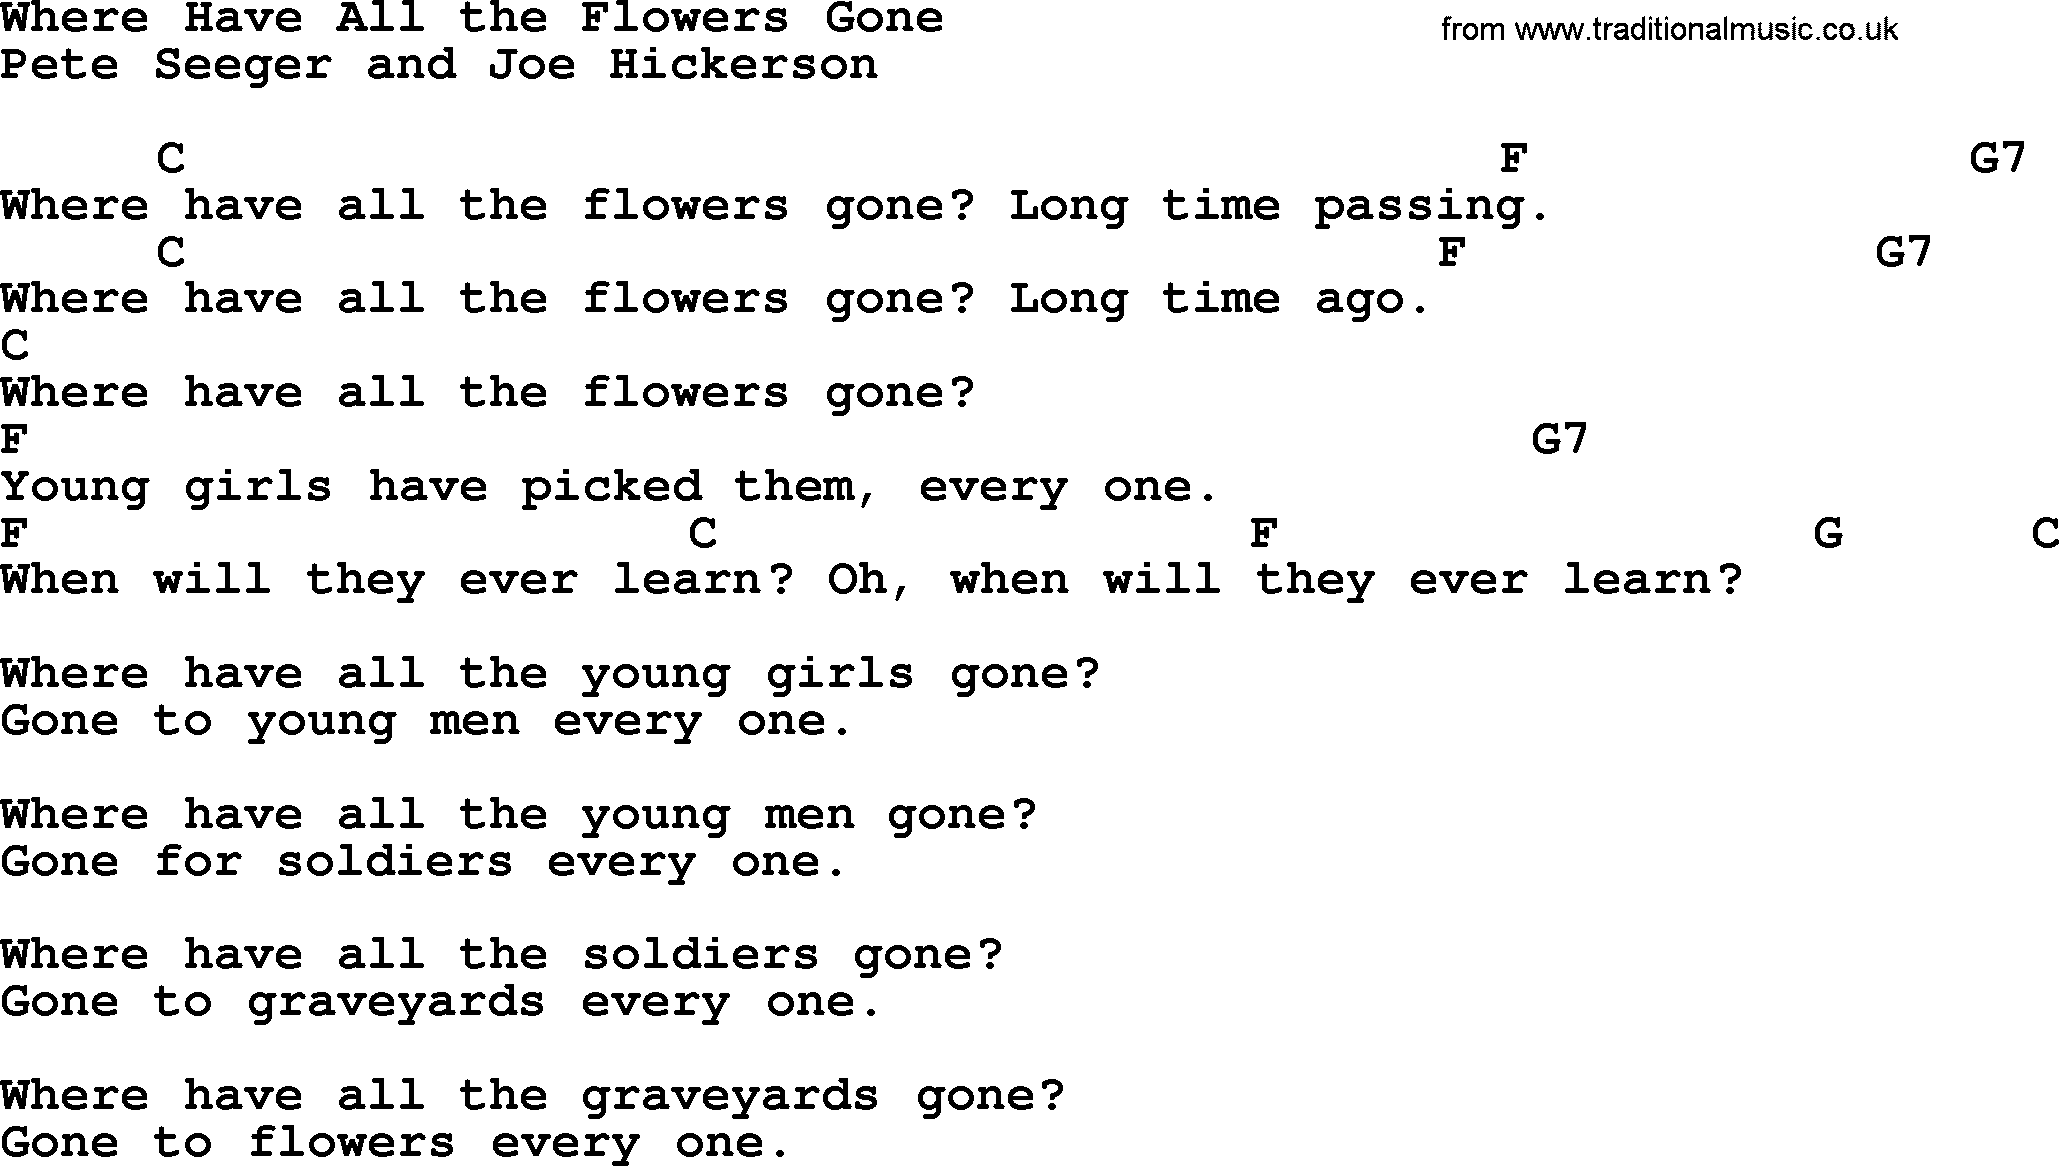 Pete Seeger song Where Have All the Flowers Gone, lyrics and chords